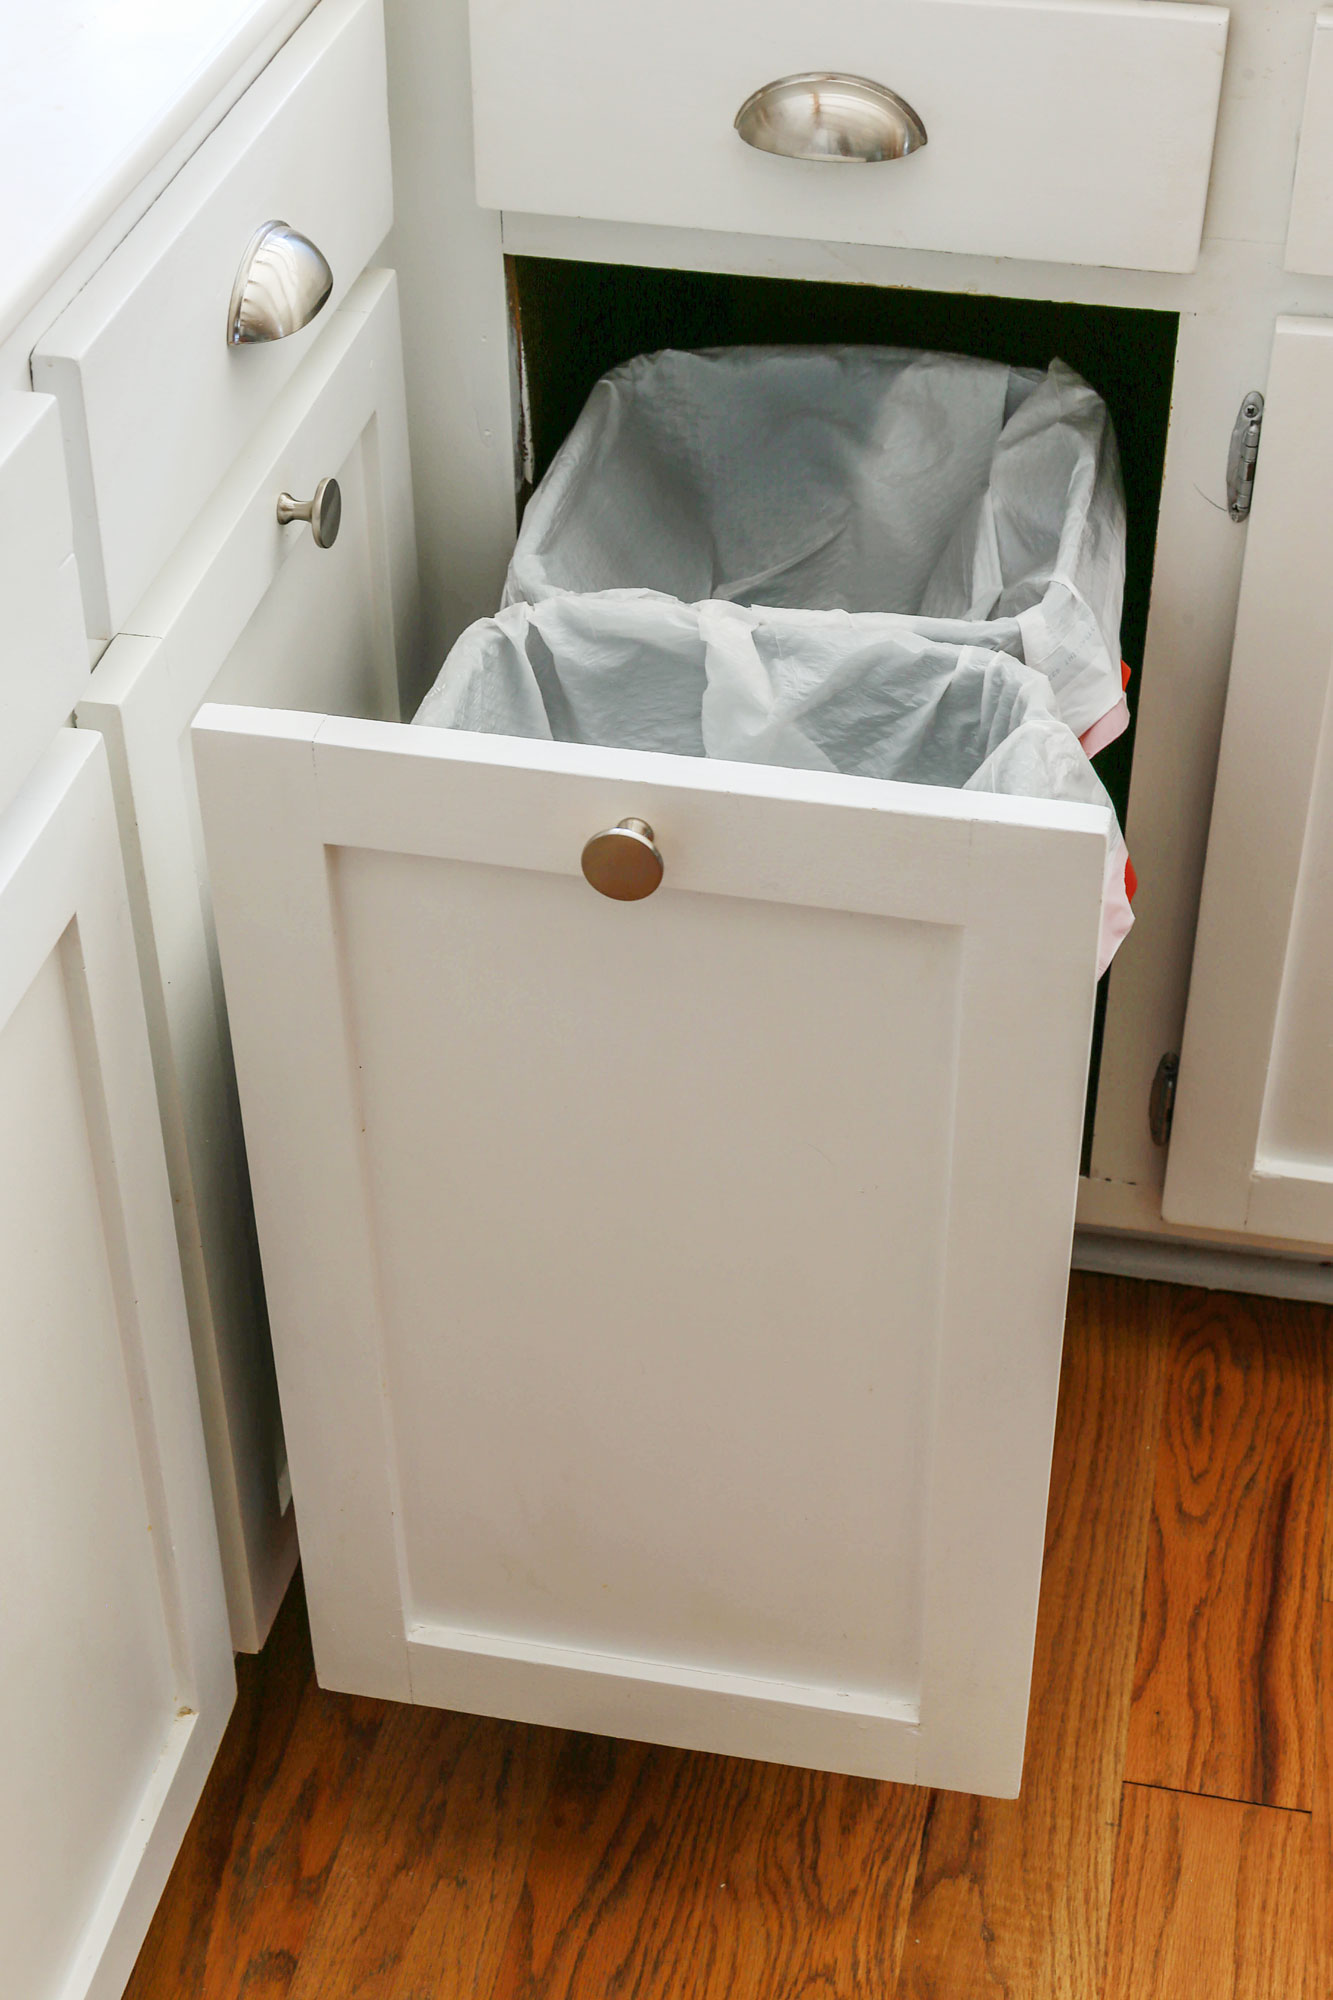 https://designingvibes.com/wp-content/uploads/2022/09/how-to-builld-trash-can-cabinet-8.jpg